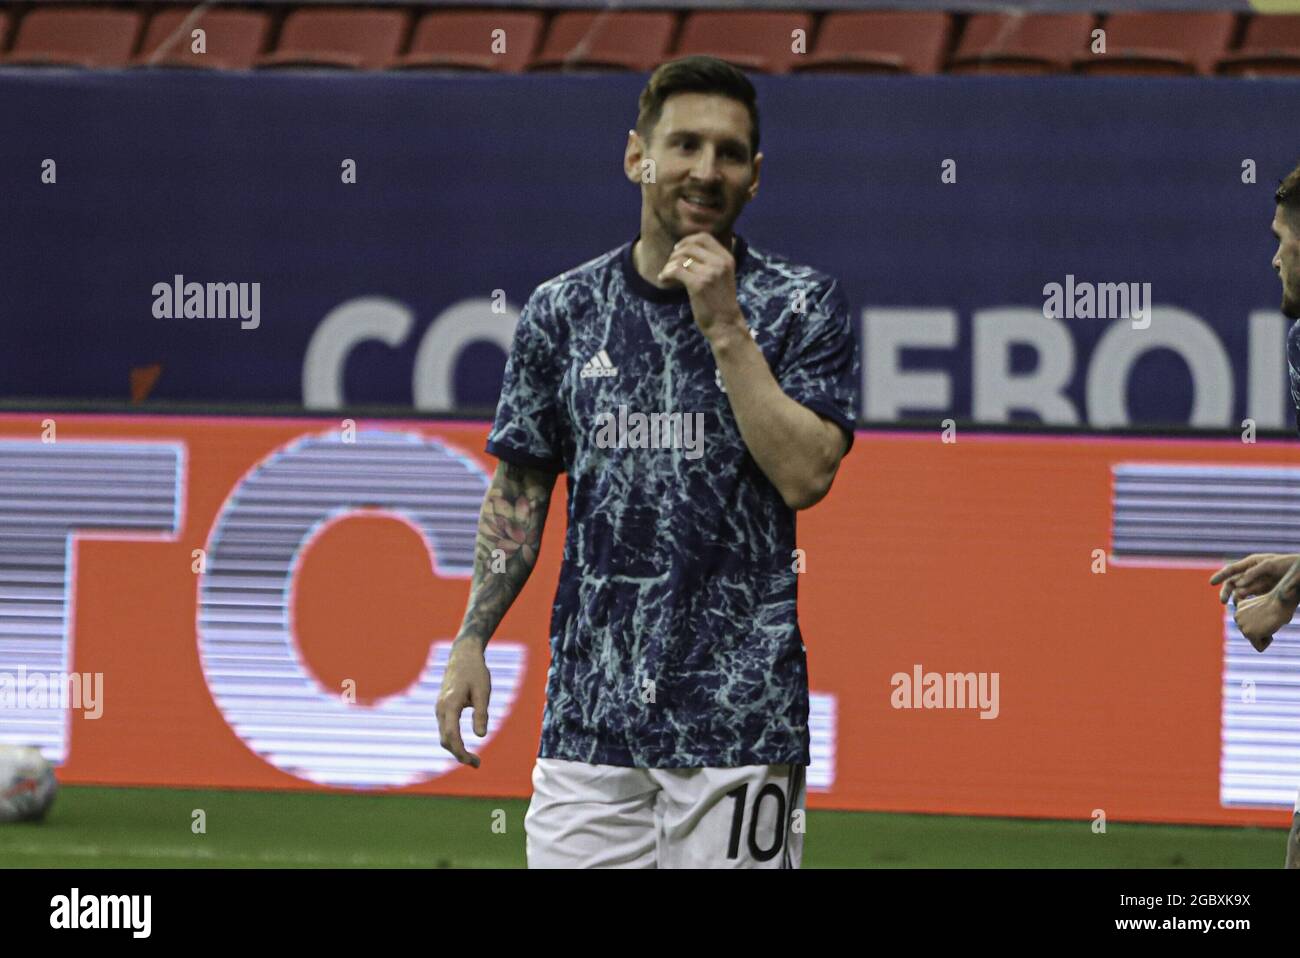 Rio de Janeiro, Rio de Janeiro, Brasil. 5th Aug, 2021. Archive* (SPO) Barcelona announces departure of player Lionel Messi. August 5, 2021, Brazil: Messi in Argentina team match on July 6, 2021 for Copa America in Brazil. Lionel Messi is no longer a Barcelona player. On afternoon of Thursday 5, the Catalan club announced departure of the striker, who had been without a contract since the end of last season. Argentine ace leaves the Camp Nou after nearly 21 years between youth and professional categories. According to a statement released by Barca, Argentine had reached an agreement for a new Stock Photo